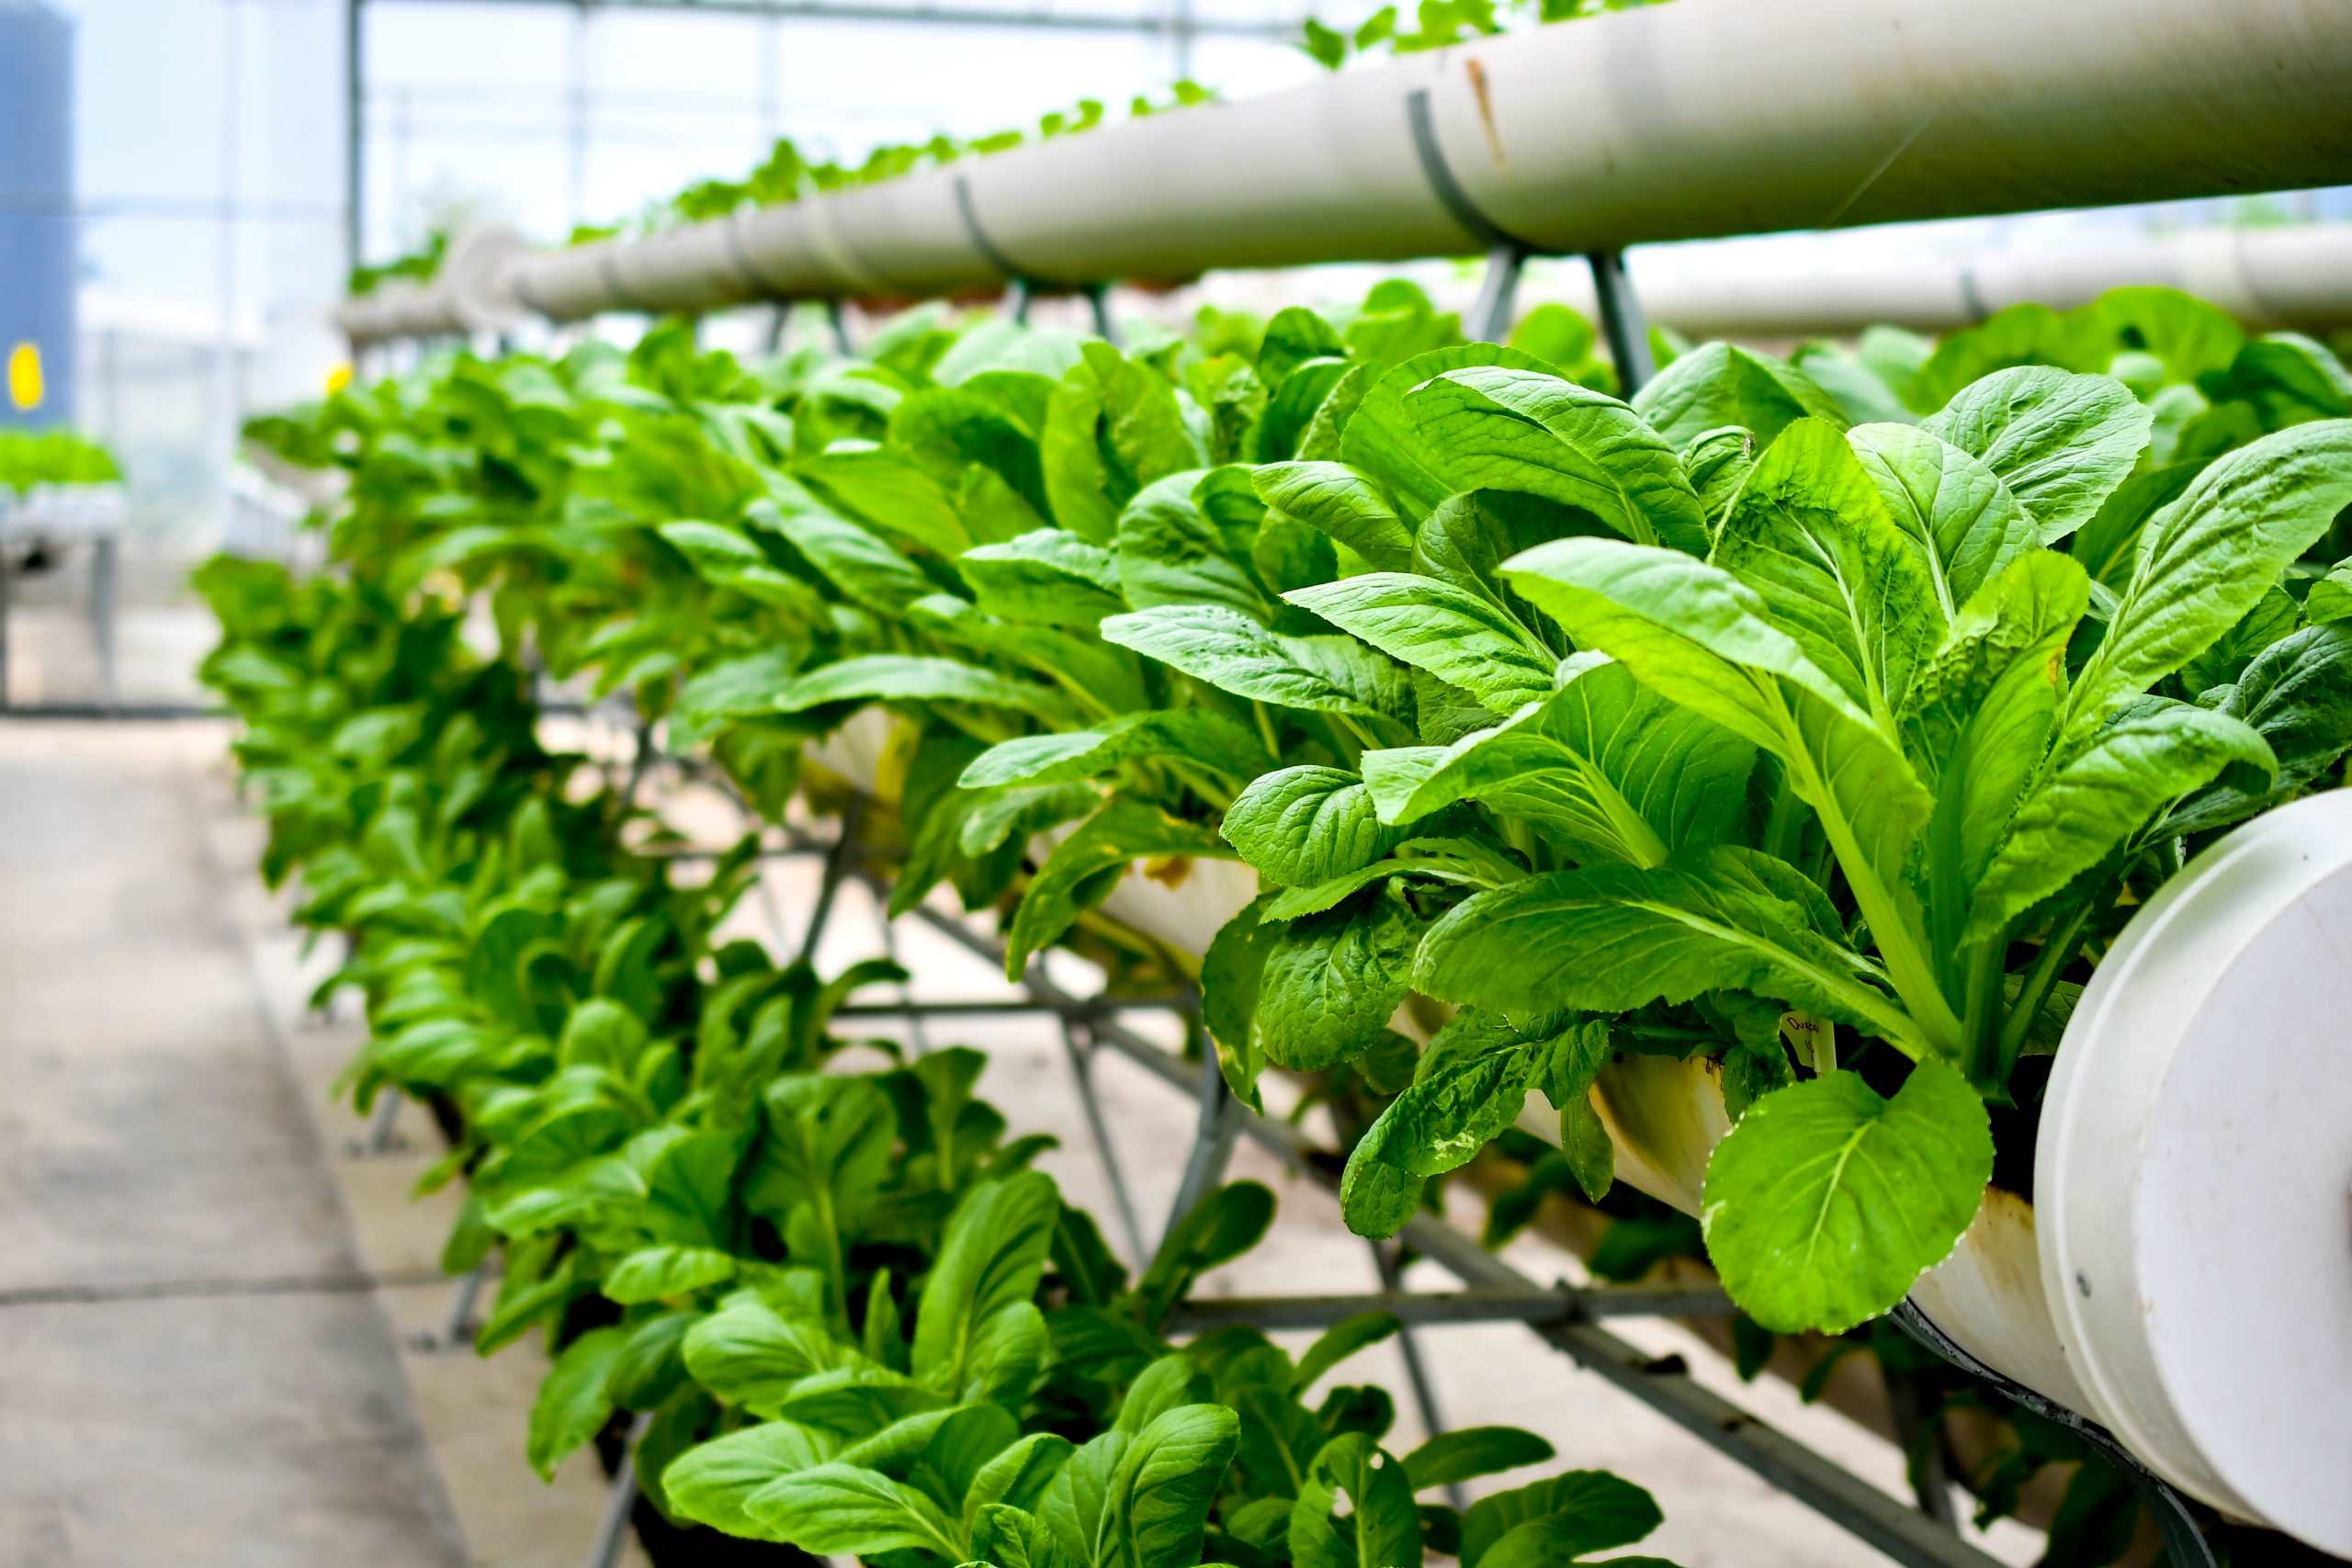 In Which Situation Would Hydroponics Be Most Useful For Sustainable Farming